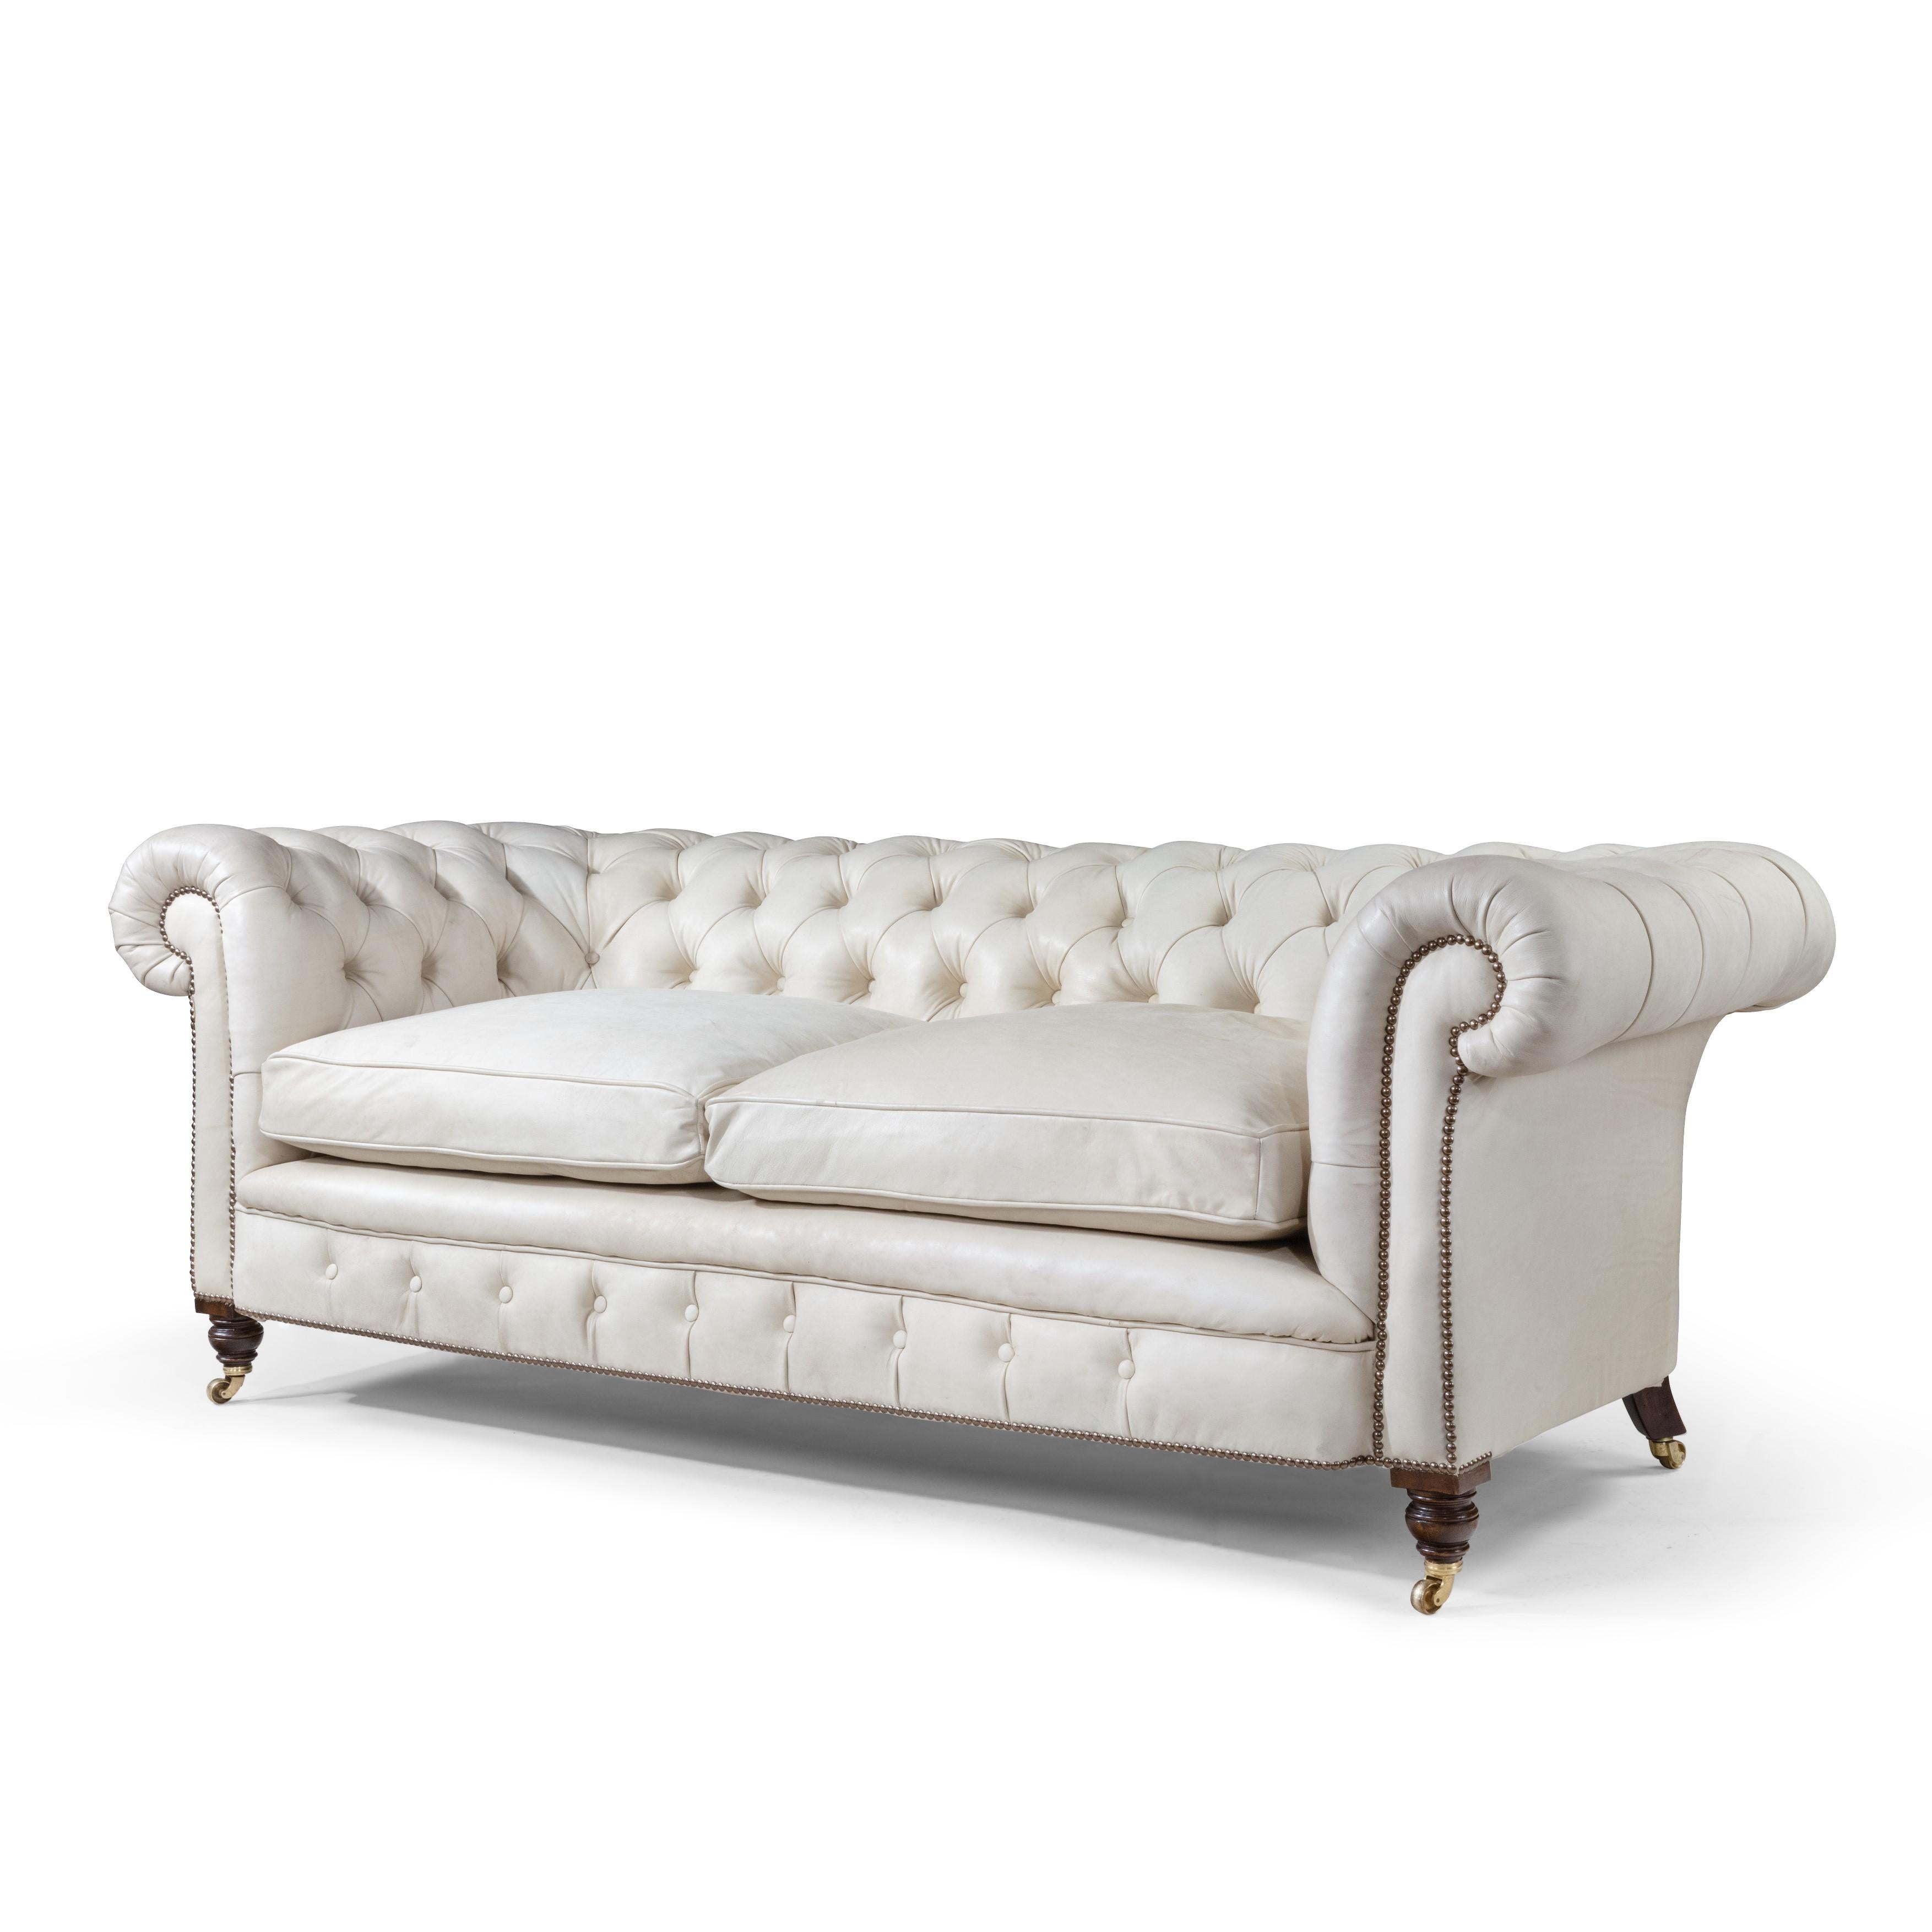 A late Victorian two-seat mahogany Chesterfield sofa, of typical form with rolled arms and two-seat cushions, on the original castors, reupholstered in natural leather (to be colored on request). English, circa 1890.
   